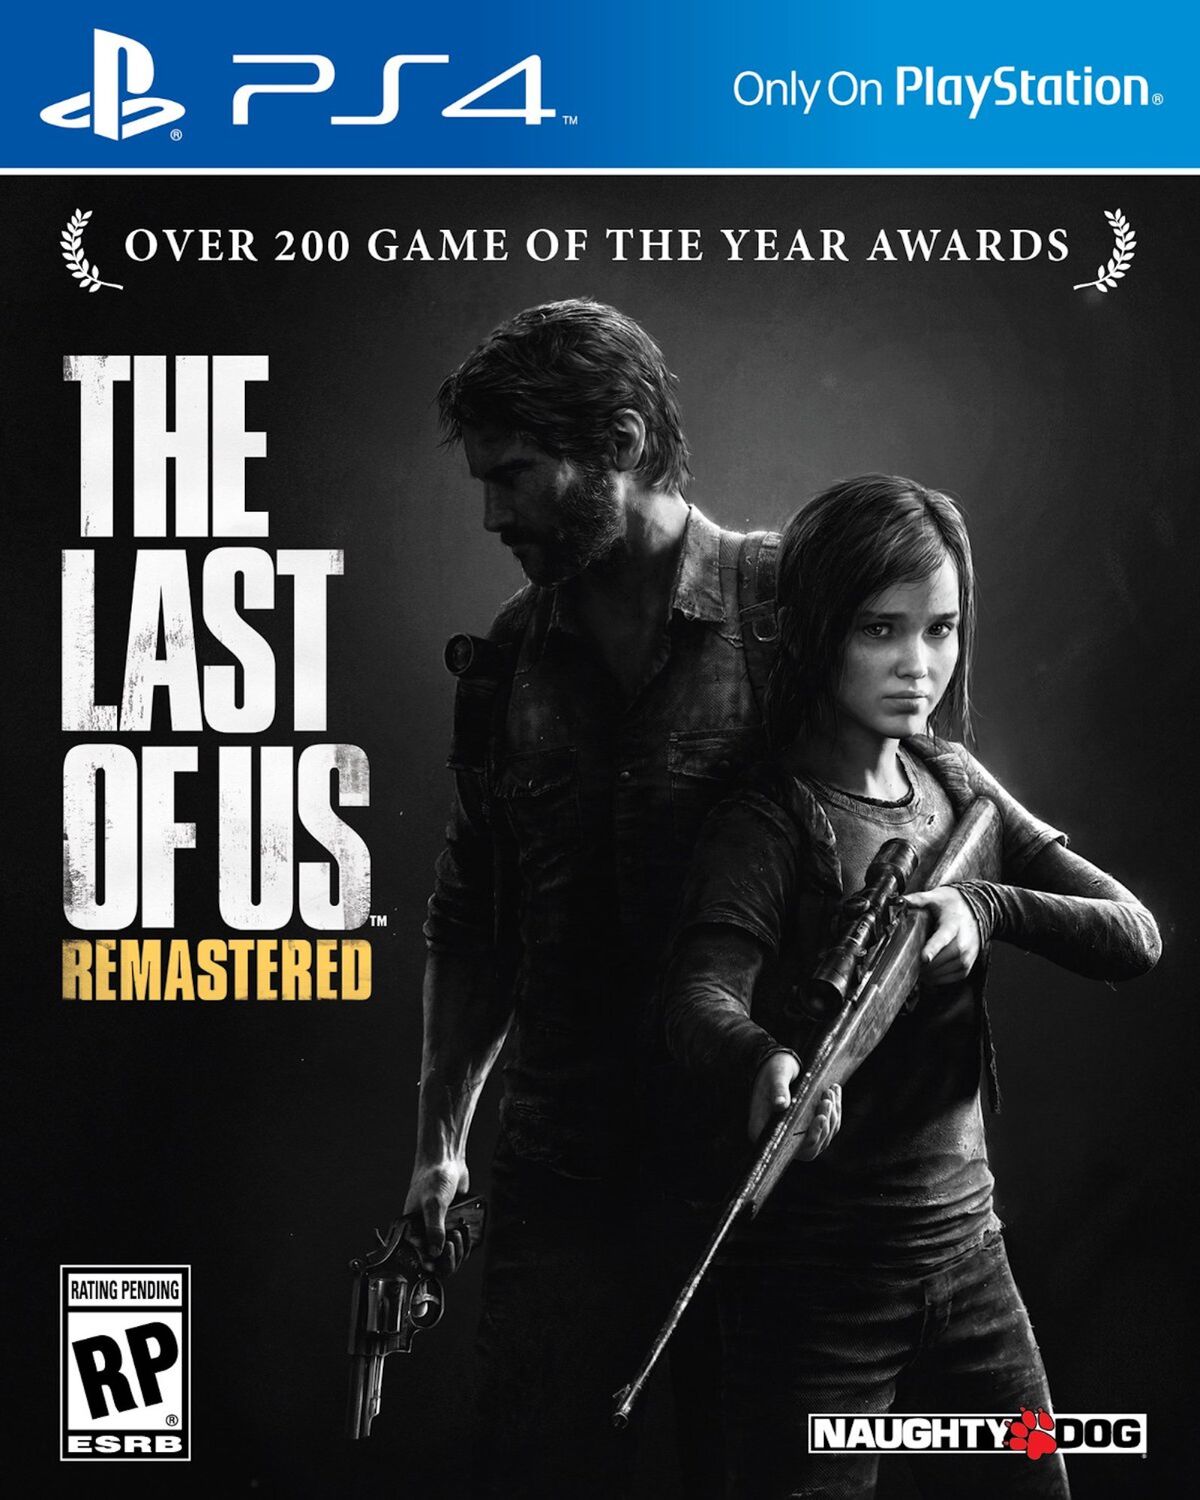 The Last of Us - Episodes 1, 2 & 3 Review